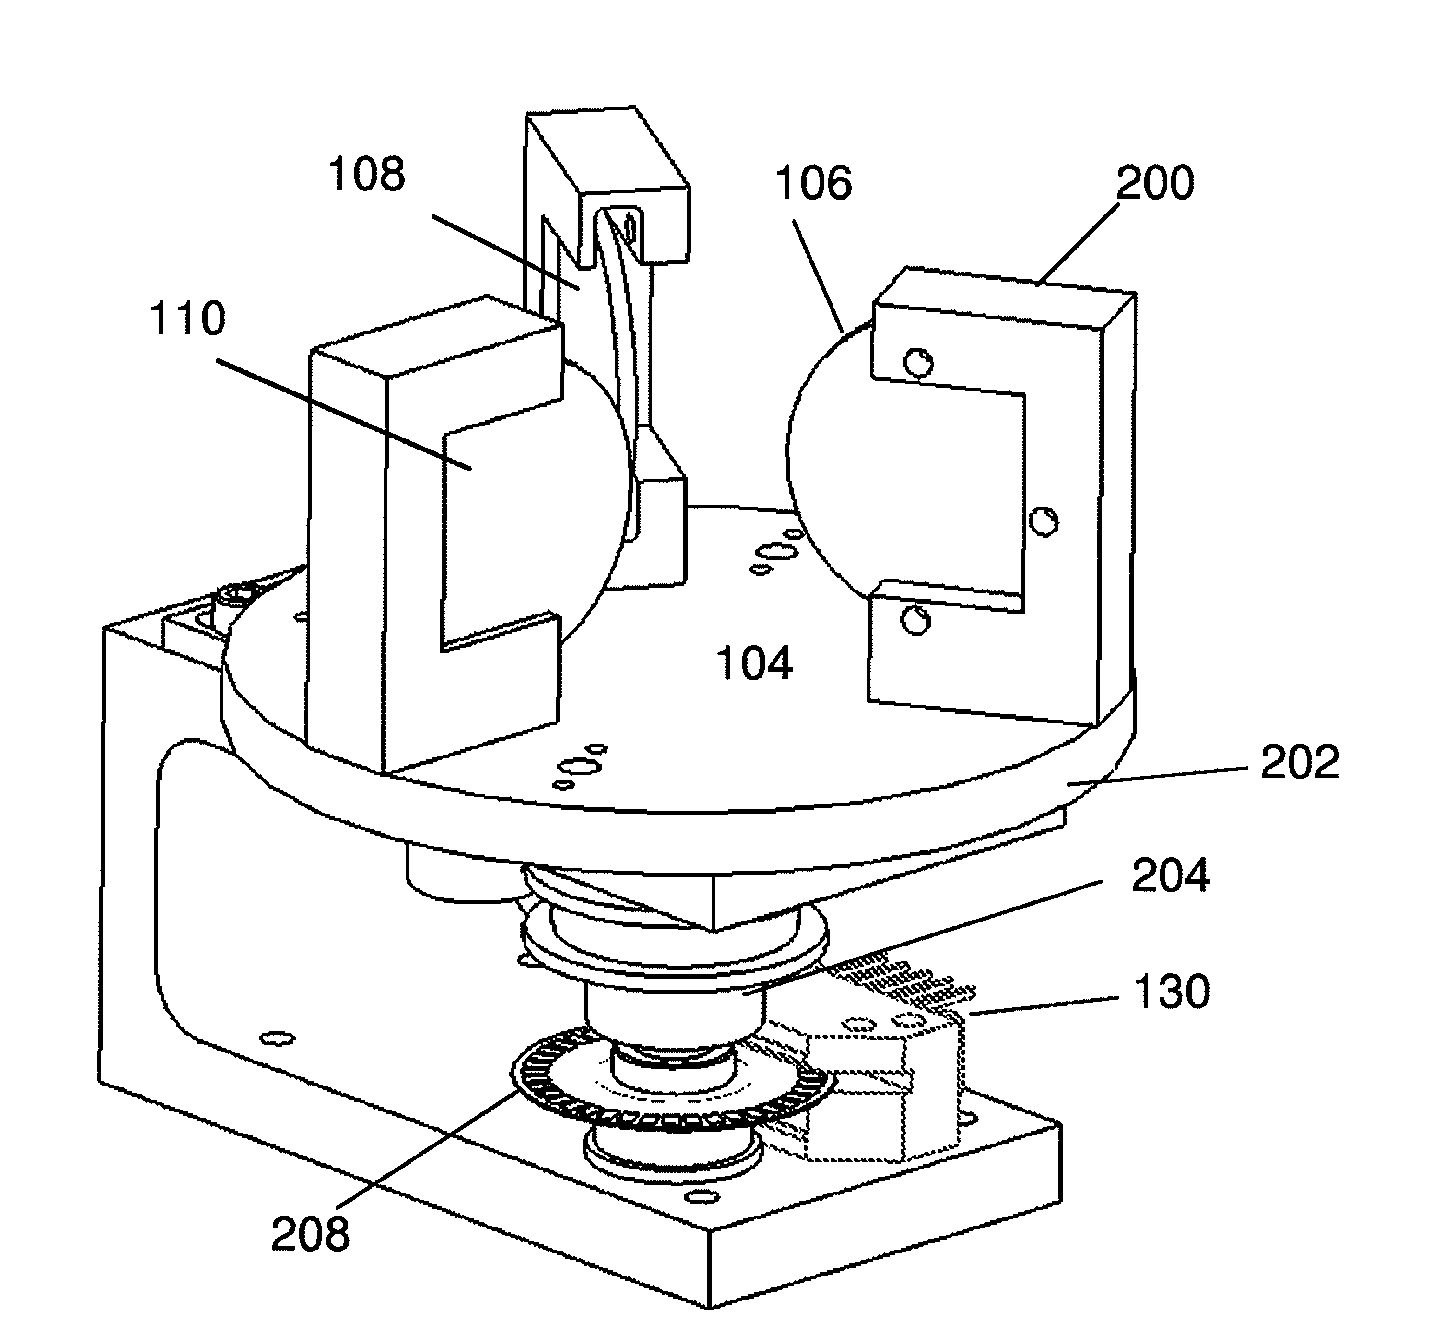 Methods and Systems for Chemical Composition Measurement and Monitoring Using a Rotating Filter Spectrometer